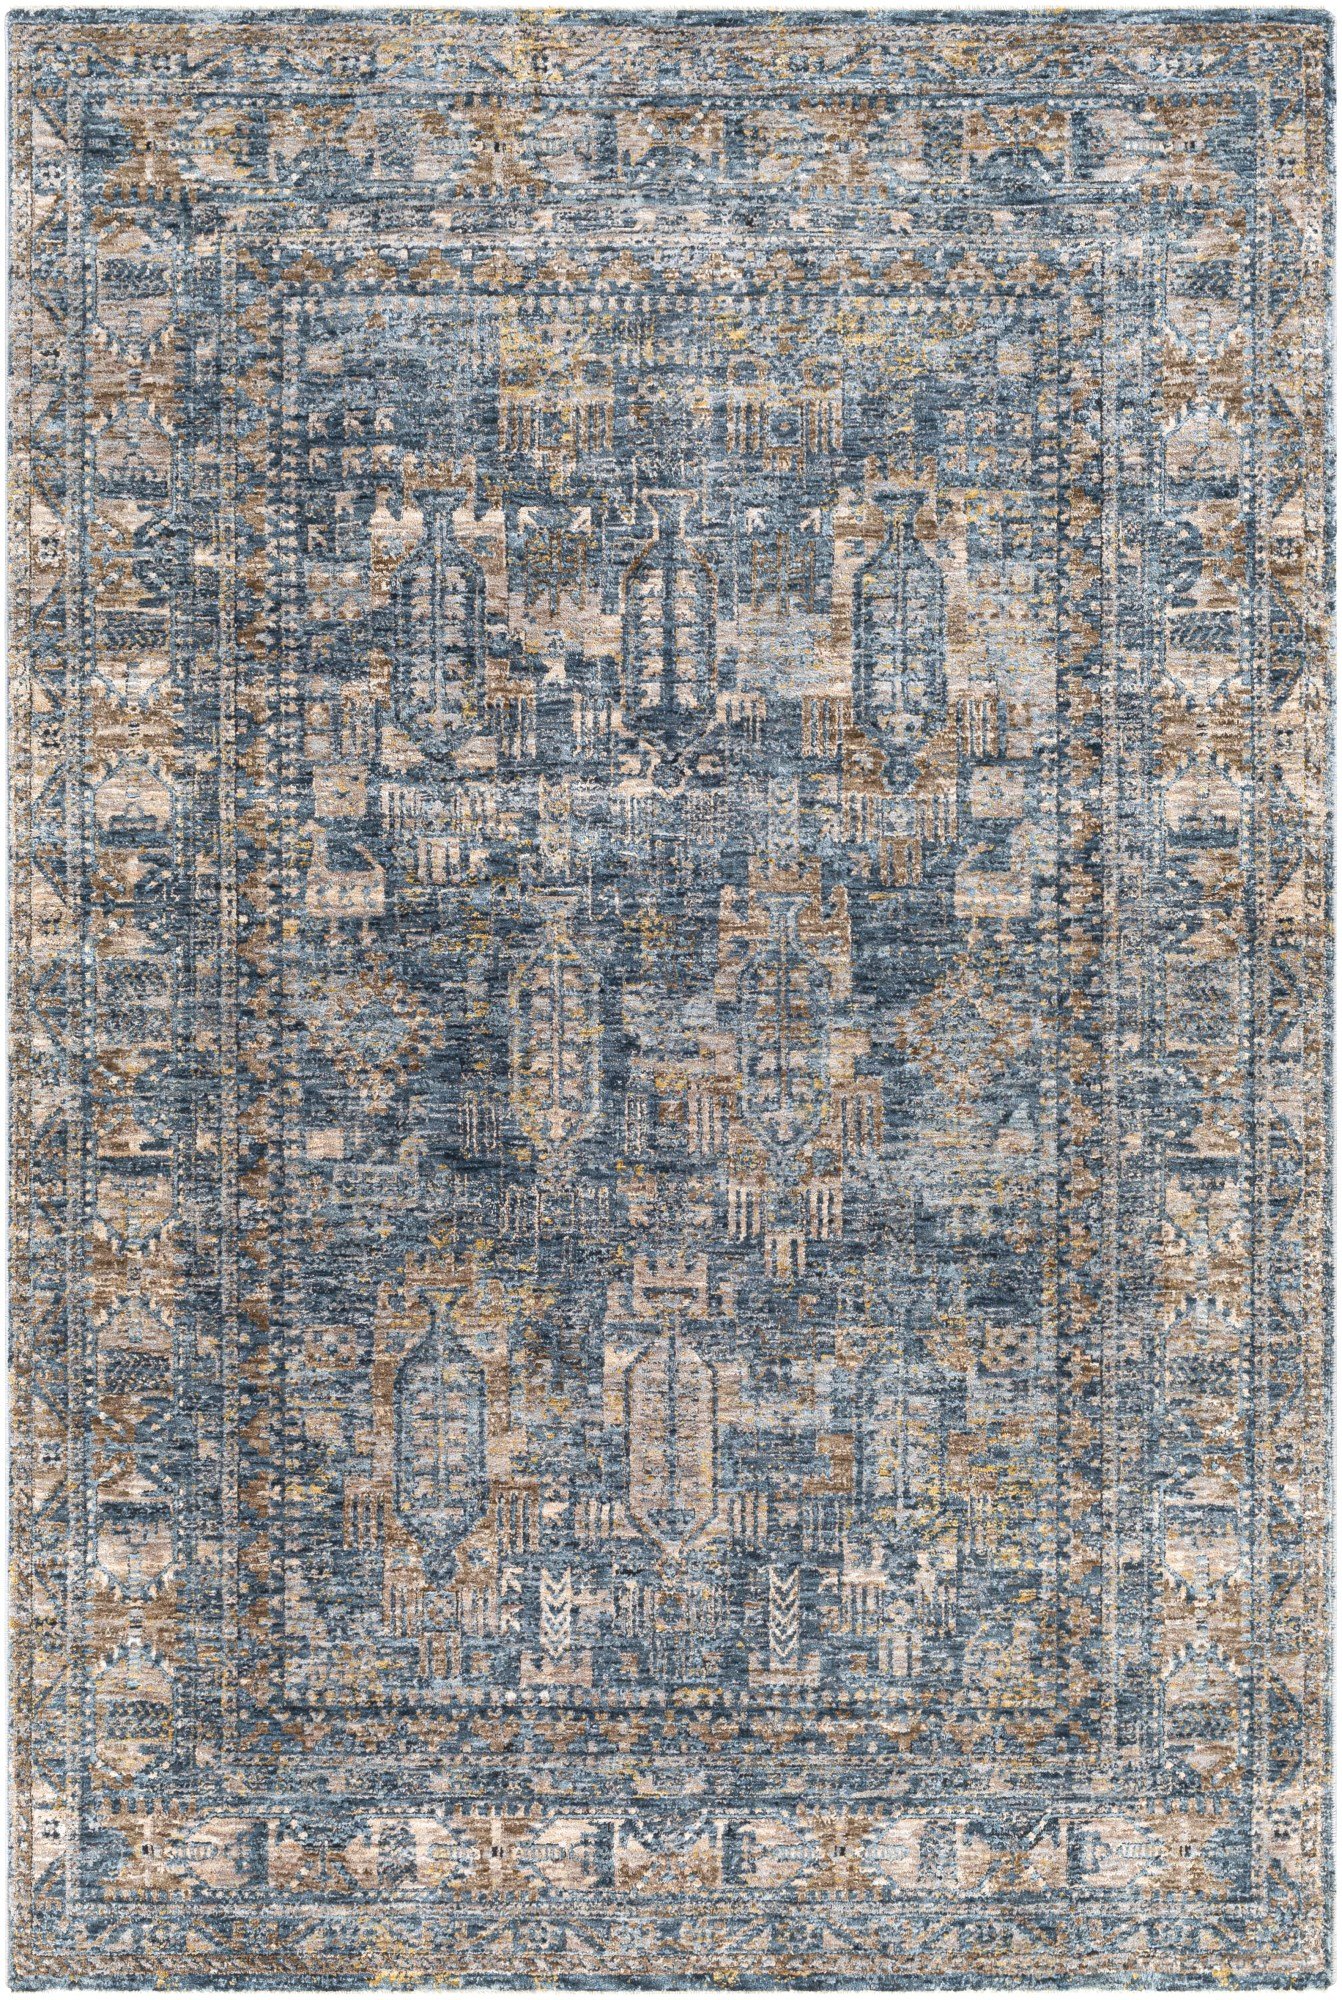 Blue Area Rugs Direct, Blue And Tan Area Rugs